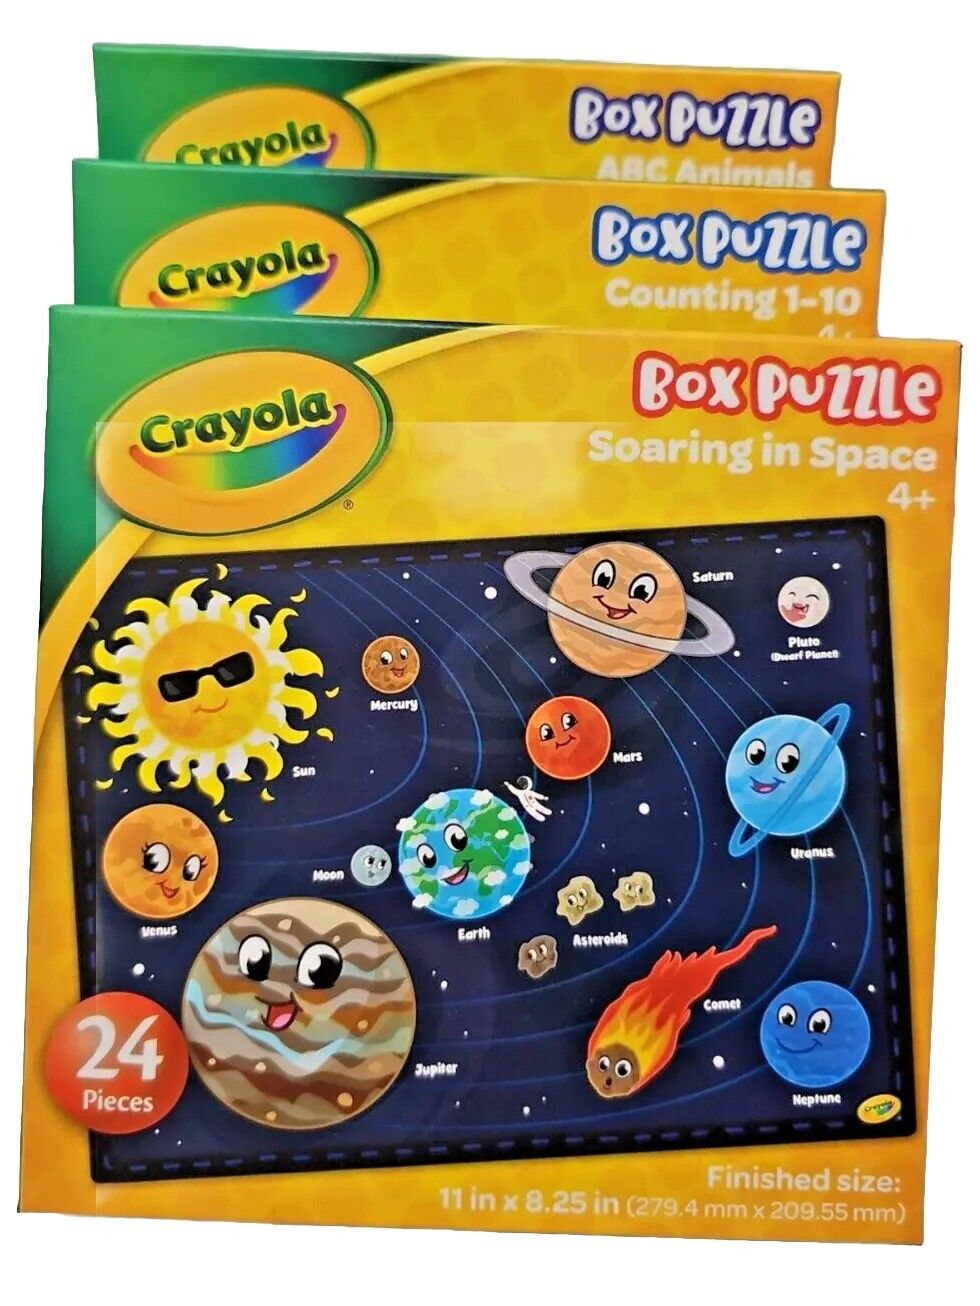 Lot 3 Crayola Box Puzzles Animals, Space, and Counting 4+ Kids Children's 24 pcs